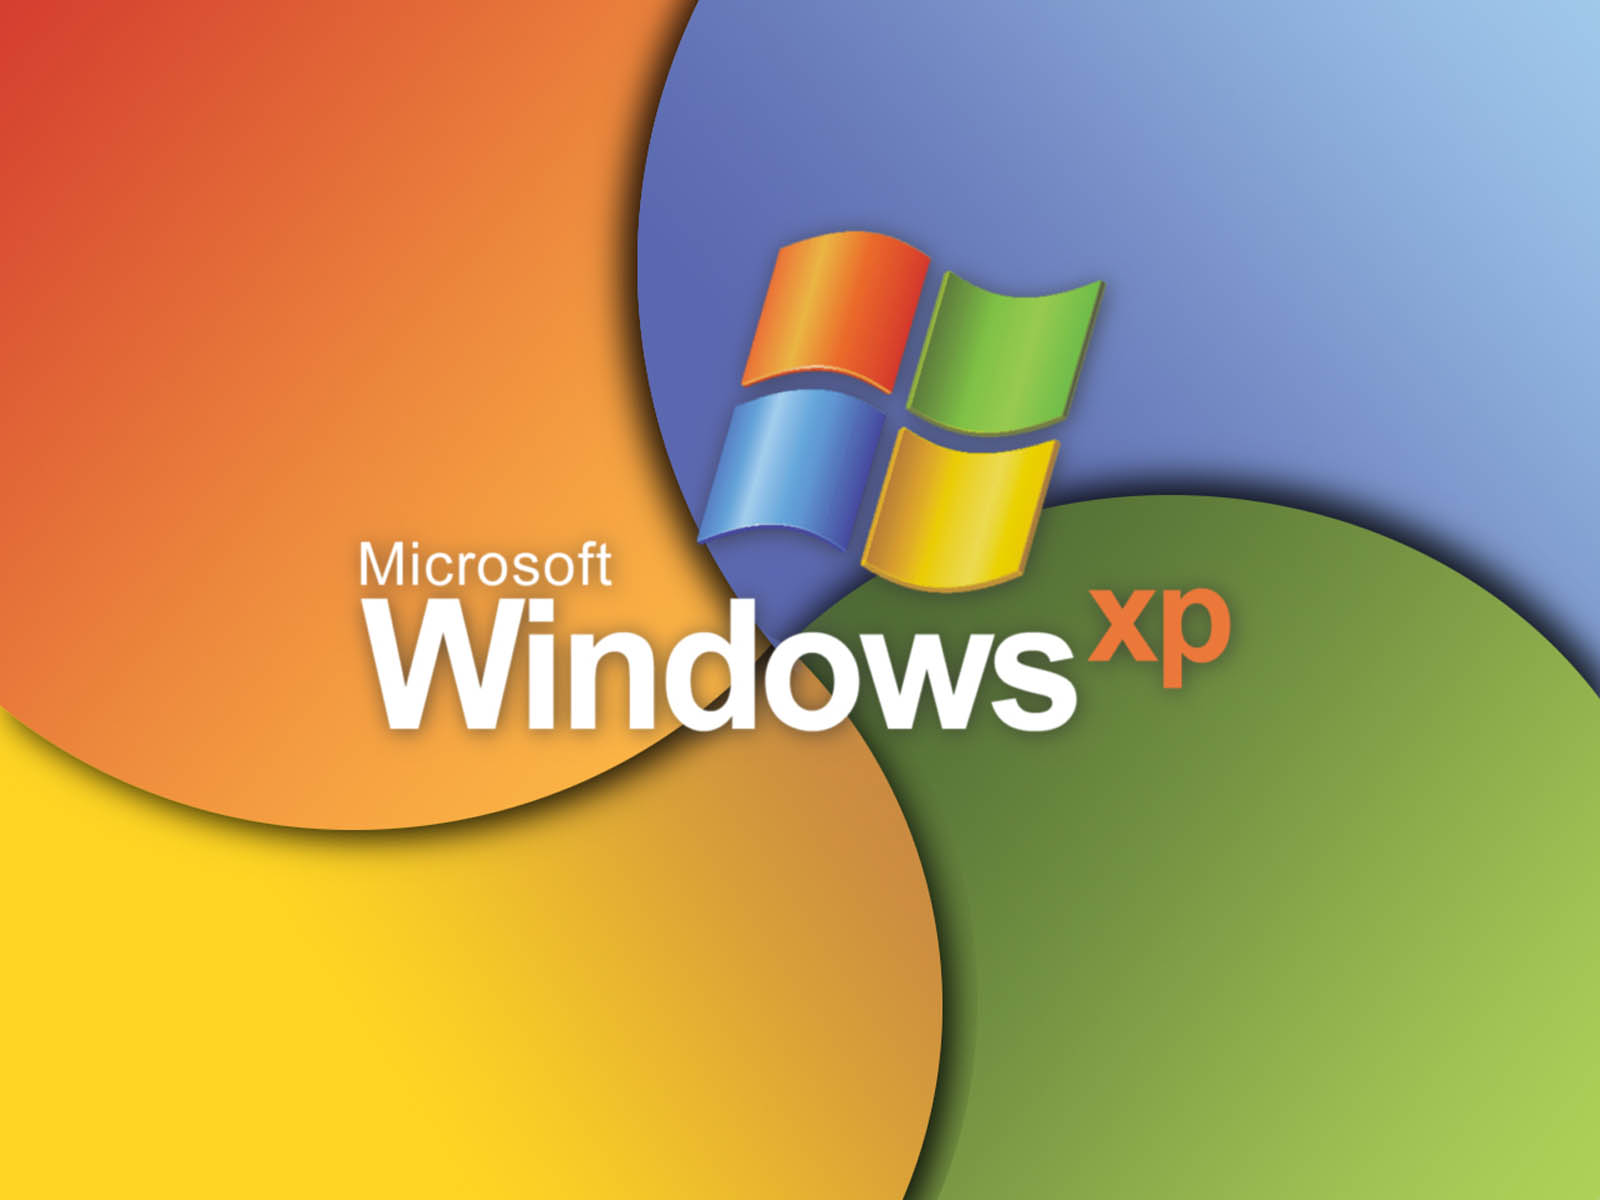 Download 45 Hd Windows Xp Wallpapers For Free - Windows Xp Wallpaper Logo - HD Wallpaper 